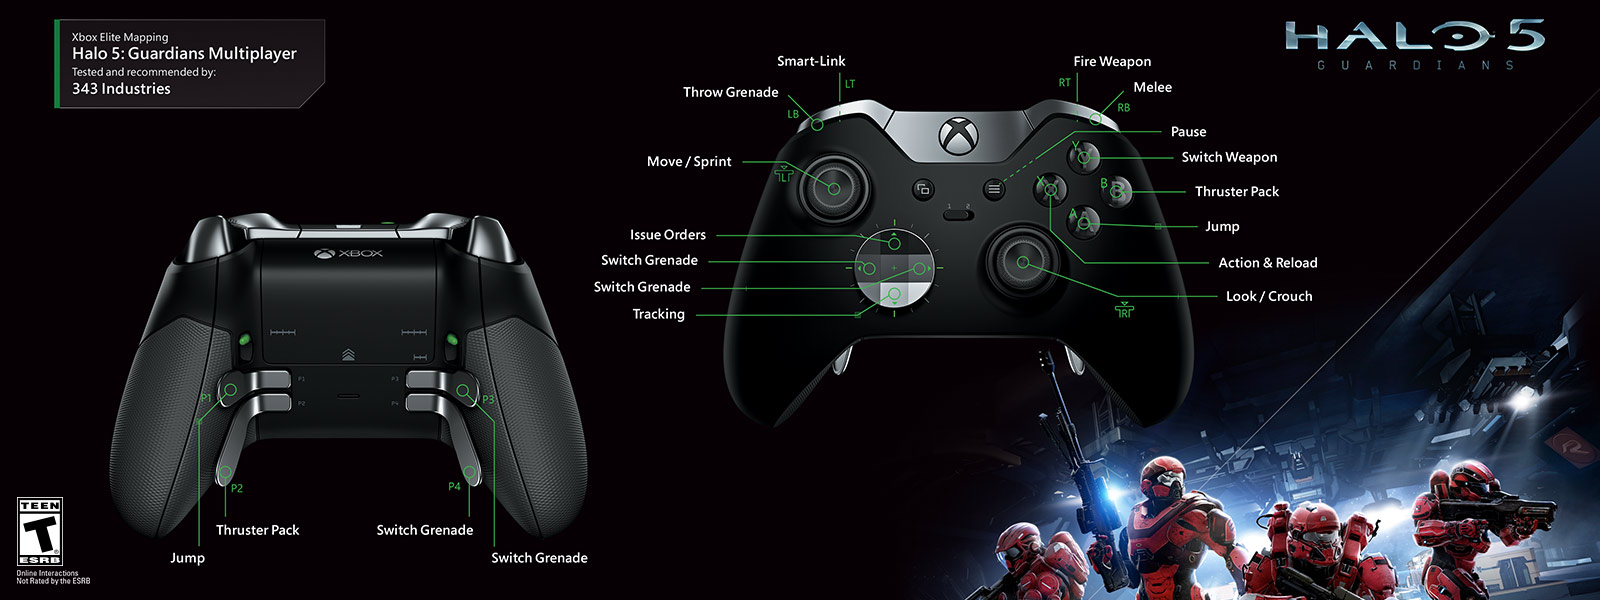 xbox controller with buttons on the back